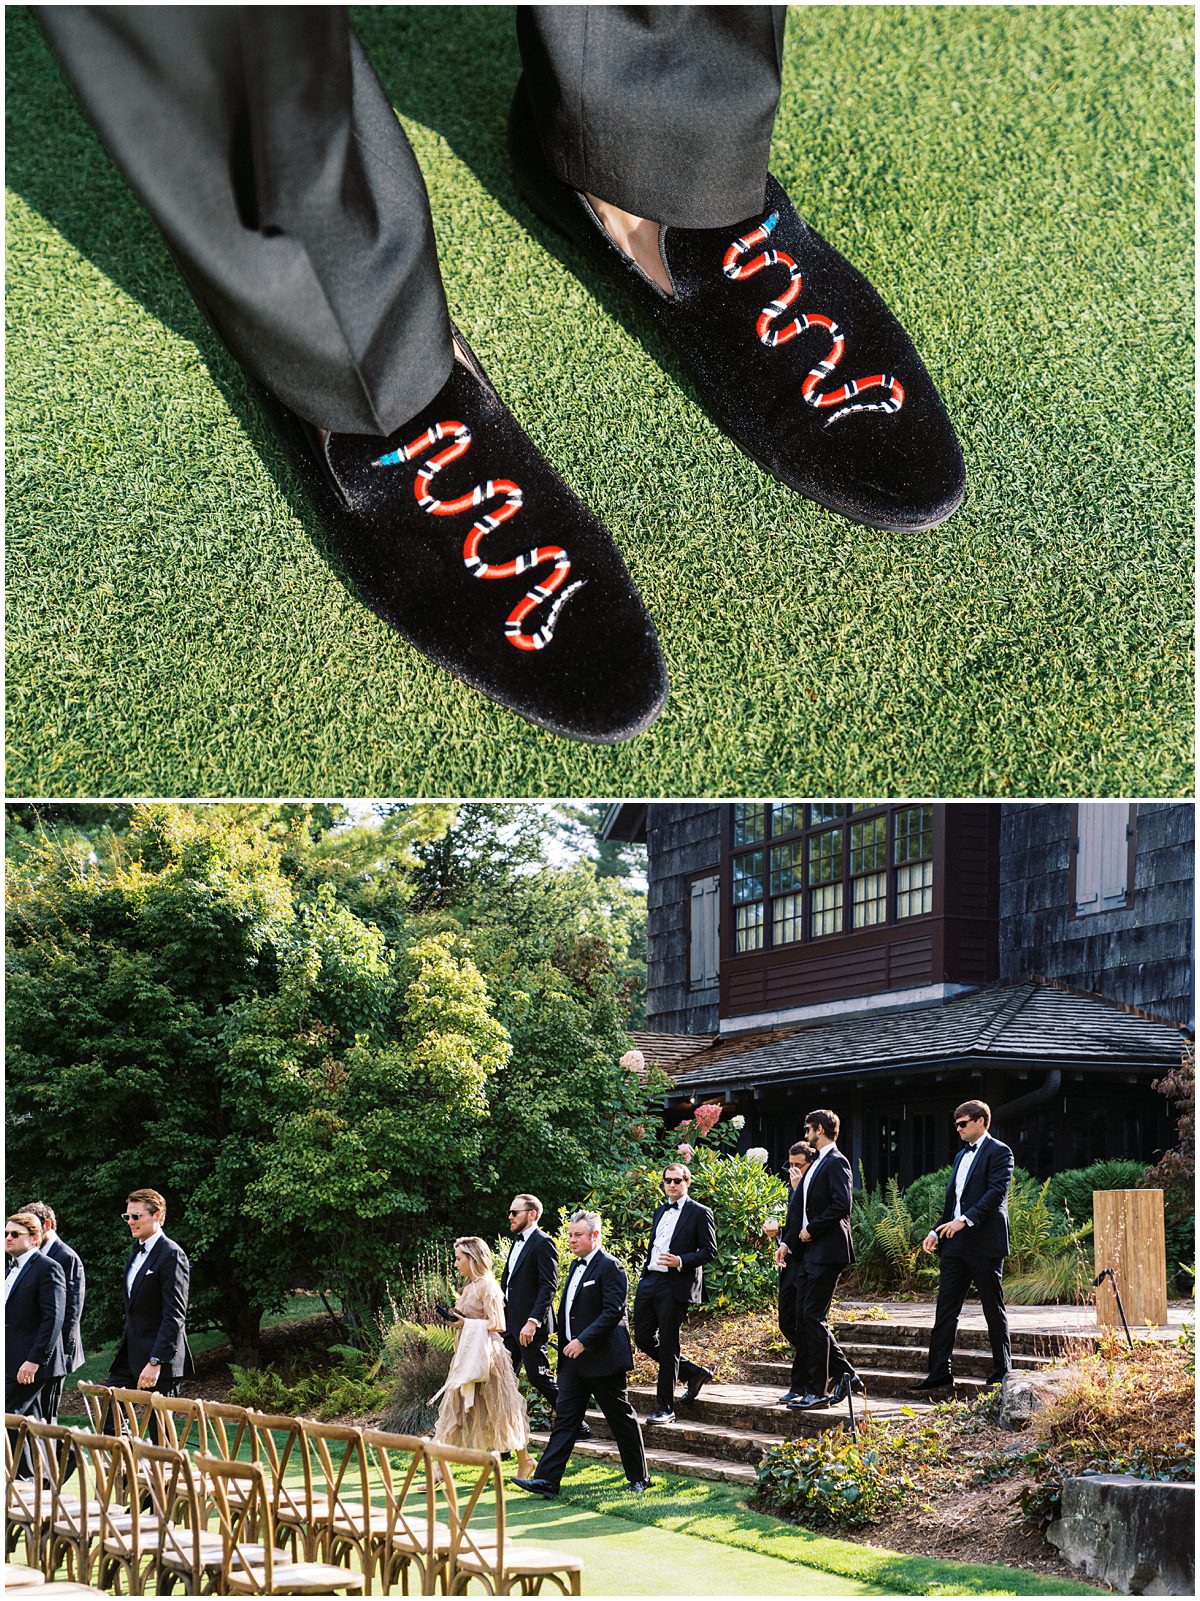 A male guest wearing velvet loafers with snakes on them at Mountaintop Golf and Lake Club wedding